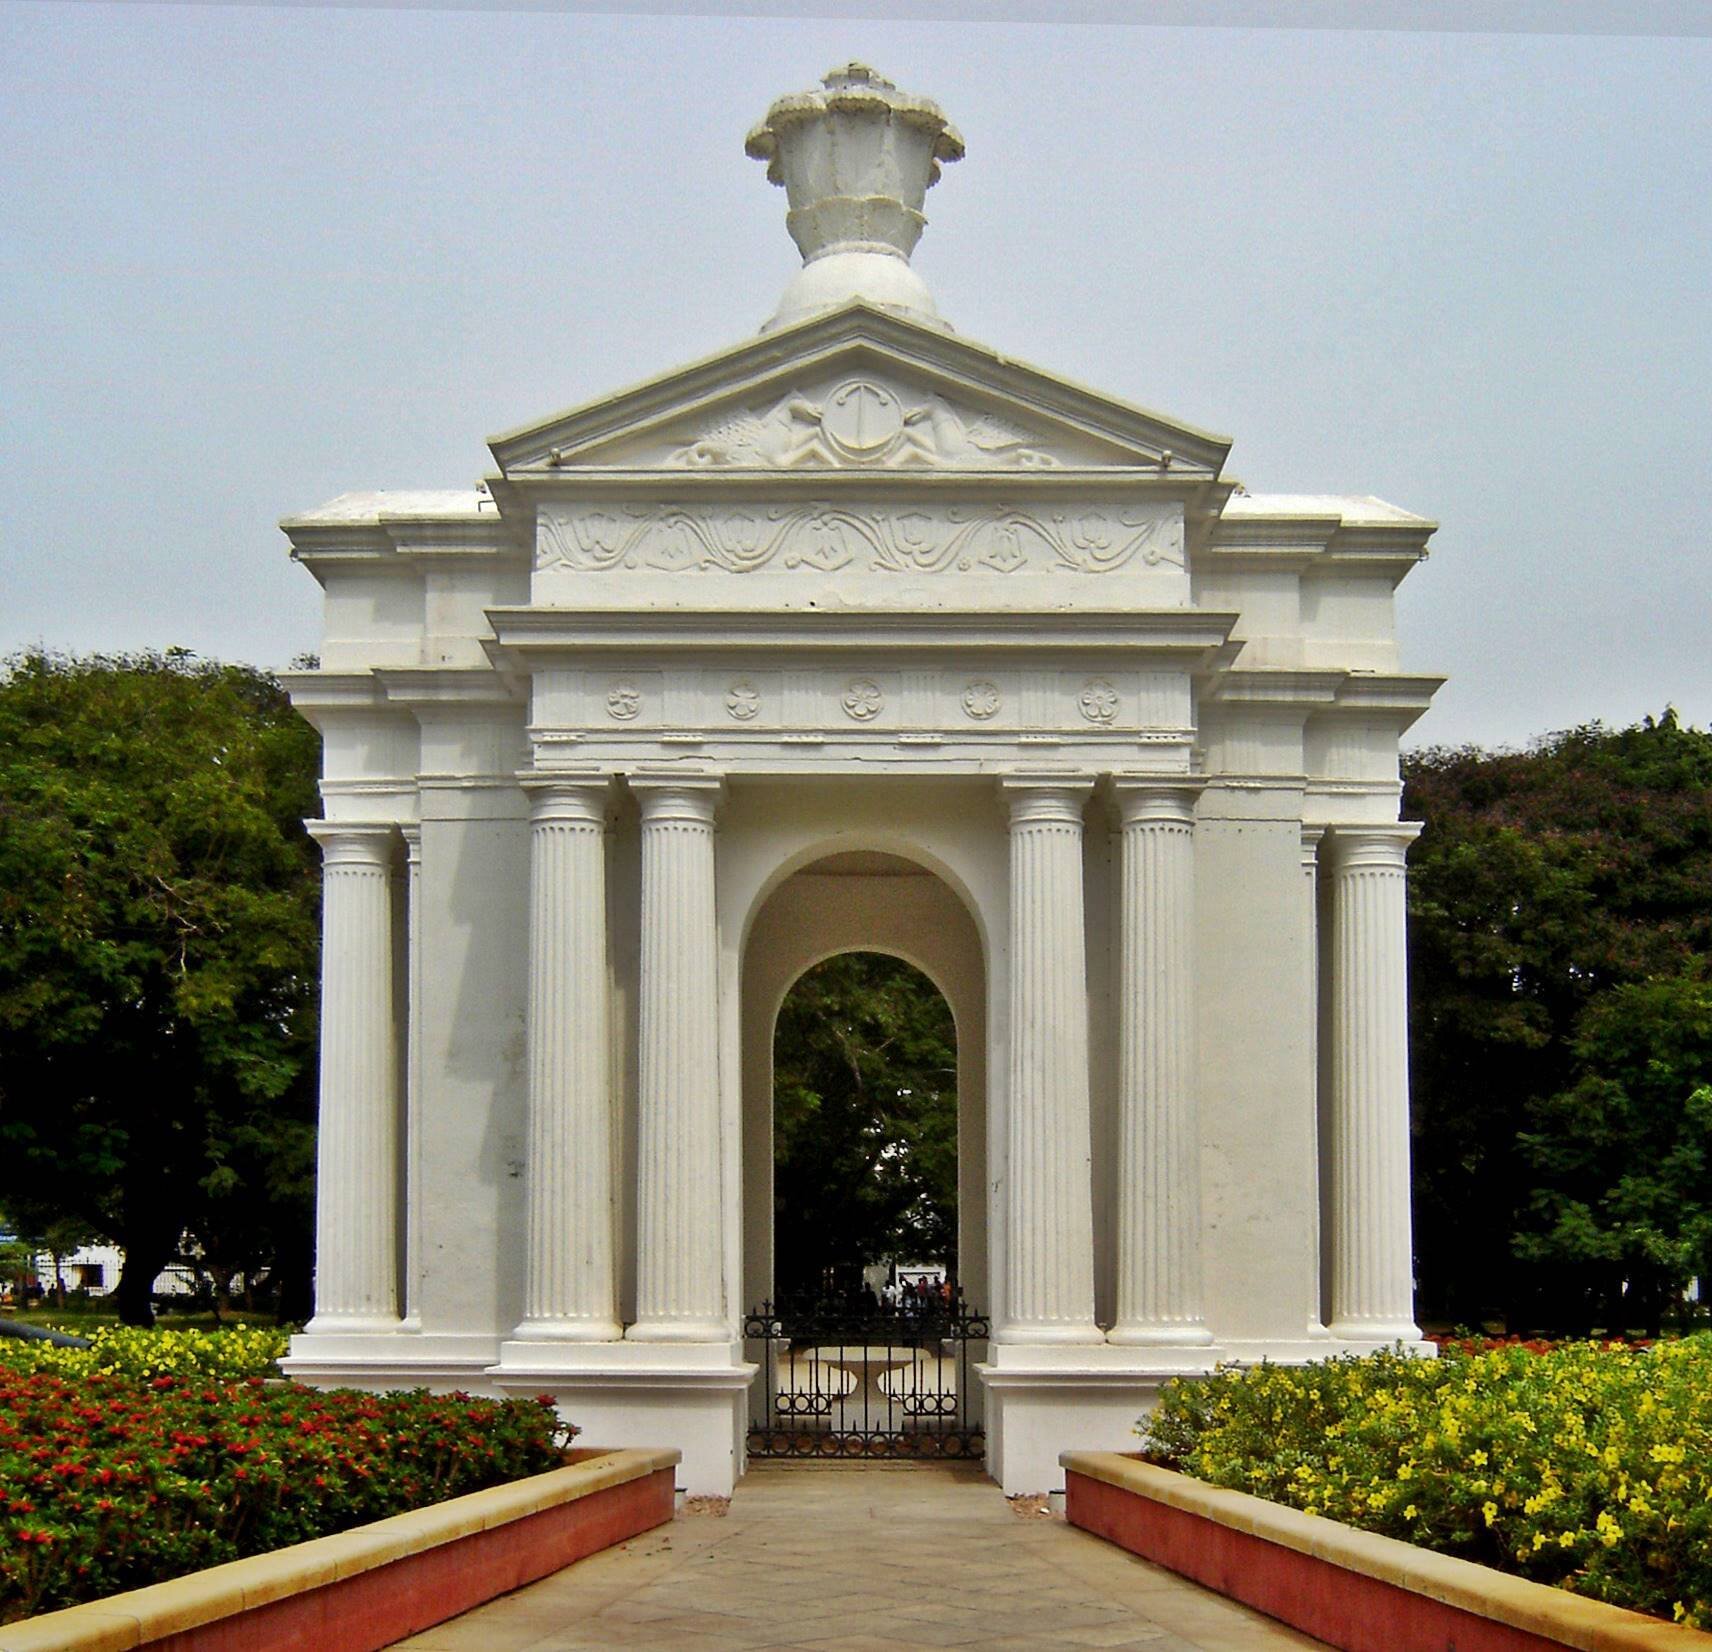 We provide all the information about Pondicherry to visitors,
Visitors can share their experience here so that new travelers can explore Pondicherry more